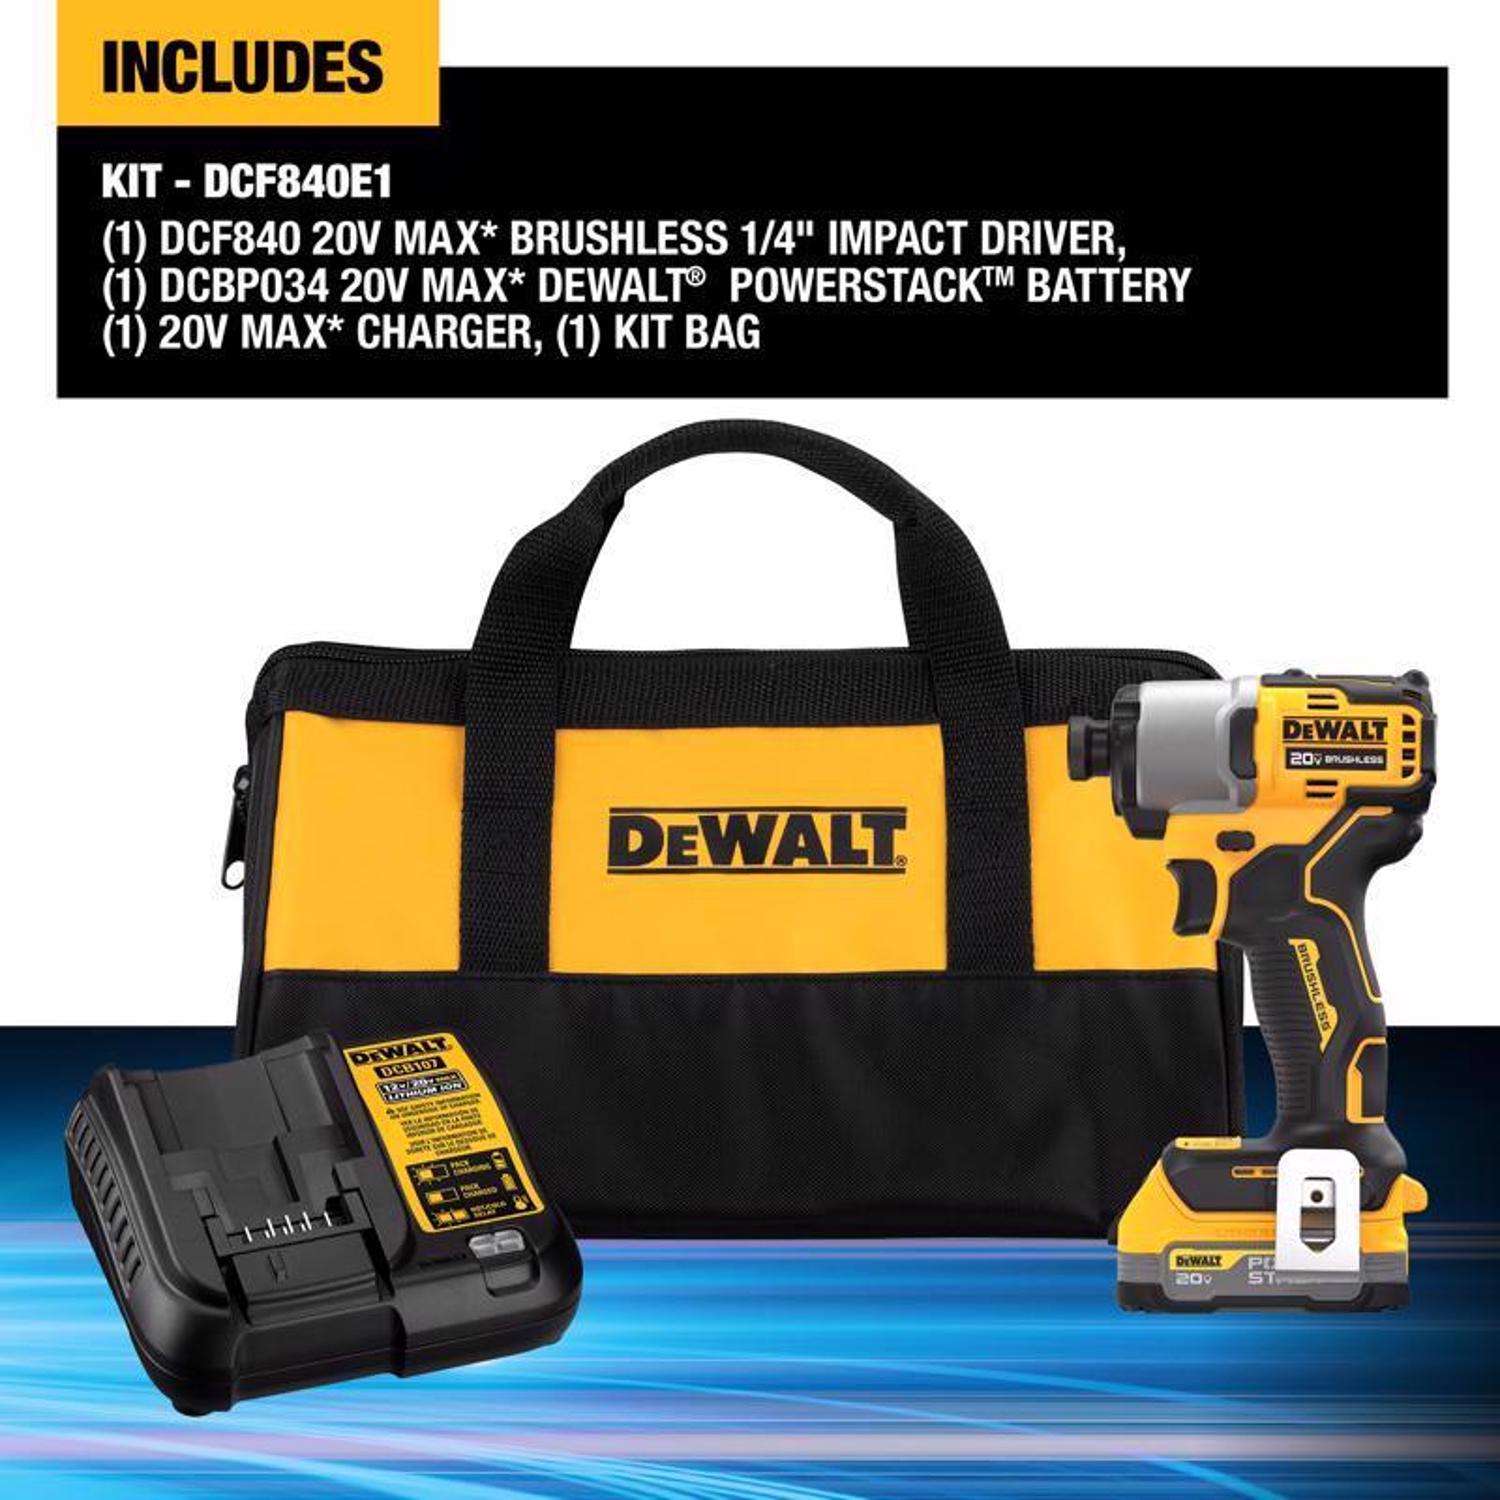 DEWALT Xtreme Drill and Impact Driver Kit with Batteries and Charger -  Brushless Motor - 3-LED Light - Cordless DCK221F2